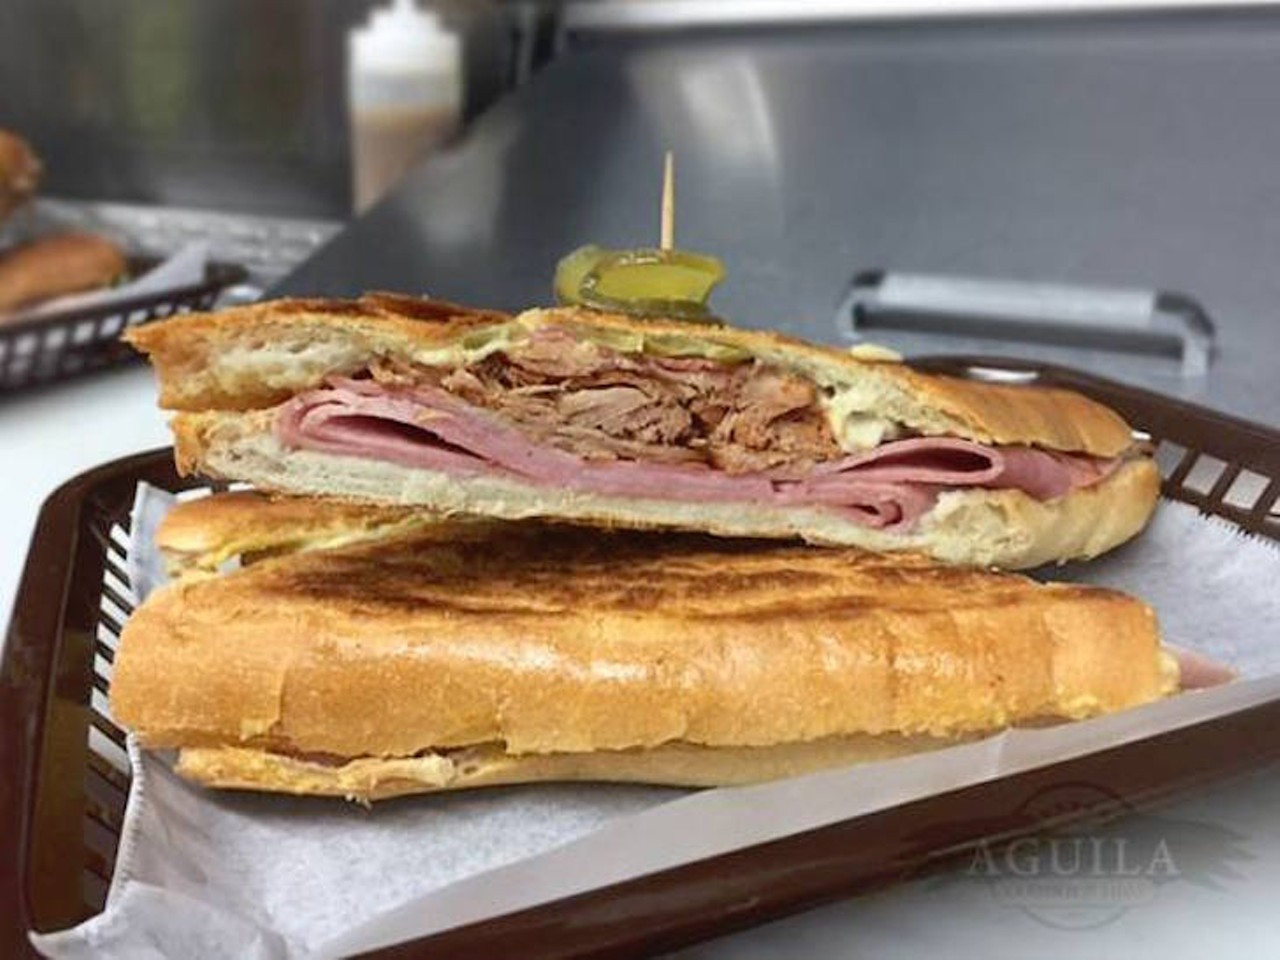 Aguila Sandwich Shop
3200 W. Hillsborough Ave., Tampa, 813-876-4022
This hold-in-the-wall sandwich shop is one of Tampa&#146;s hidden gems. The sandwich comes in sizes small, medium and large, but if you want salami, you have to ask. Tampa-style Cuban sandwich lovers, or as some insist, OG Cuban sandwich lovers know that salami is a must.
Photo via Aguila Sandwich Shop/Facebook